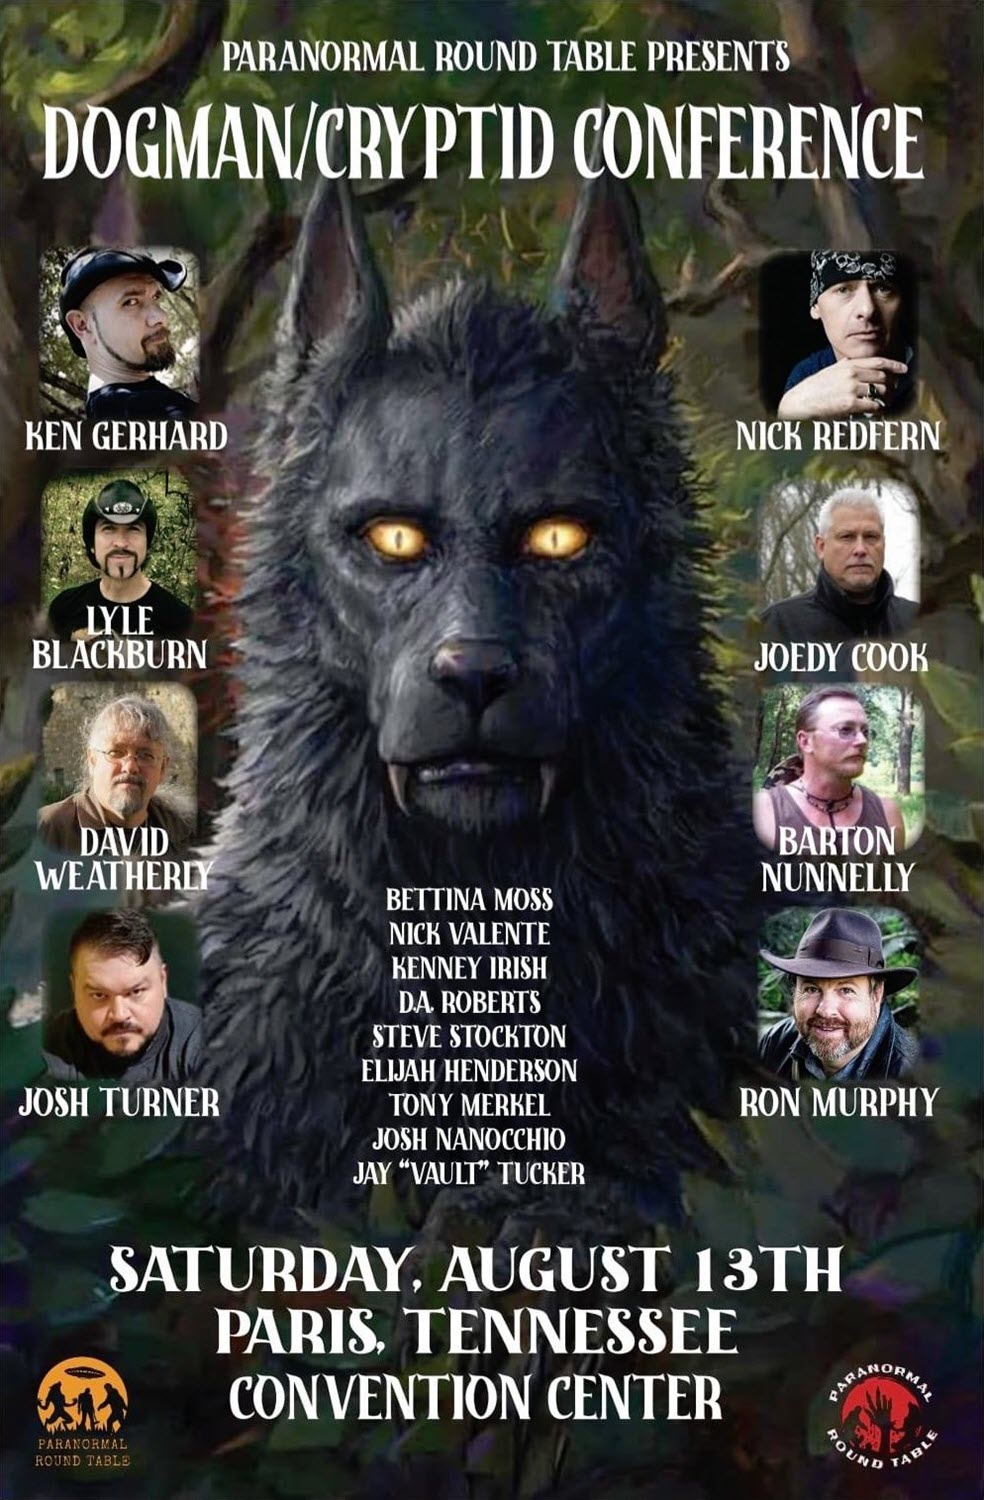 1st Annual Dogman/Cryptid Conference Paris, TN Aug. 13, 2022